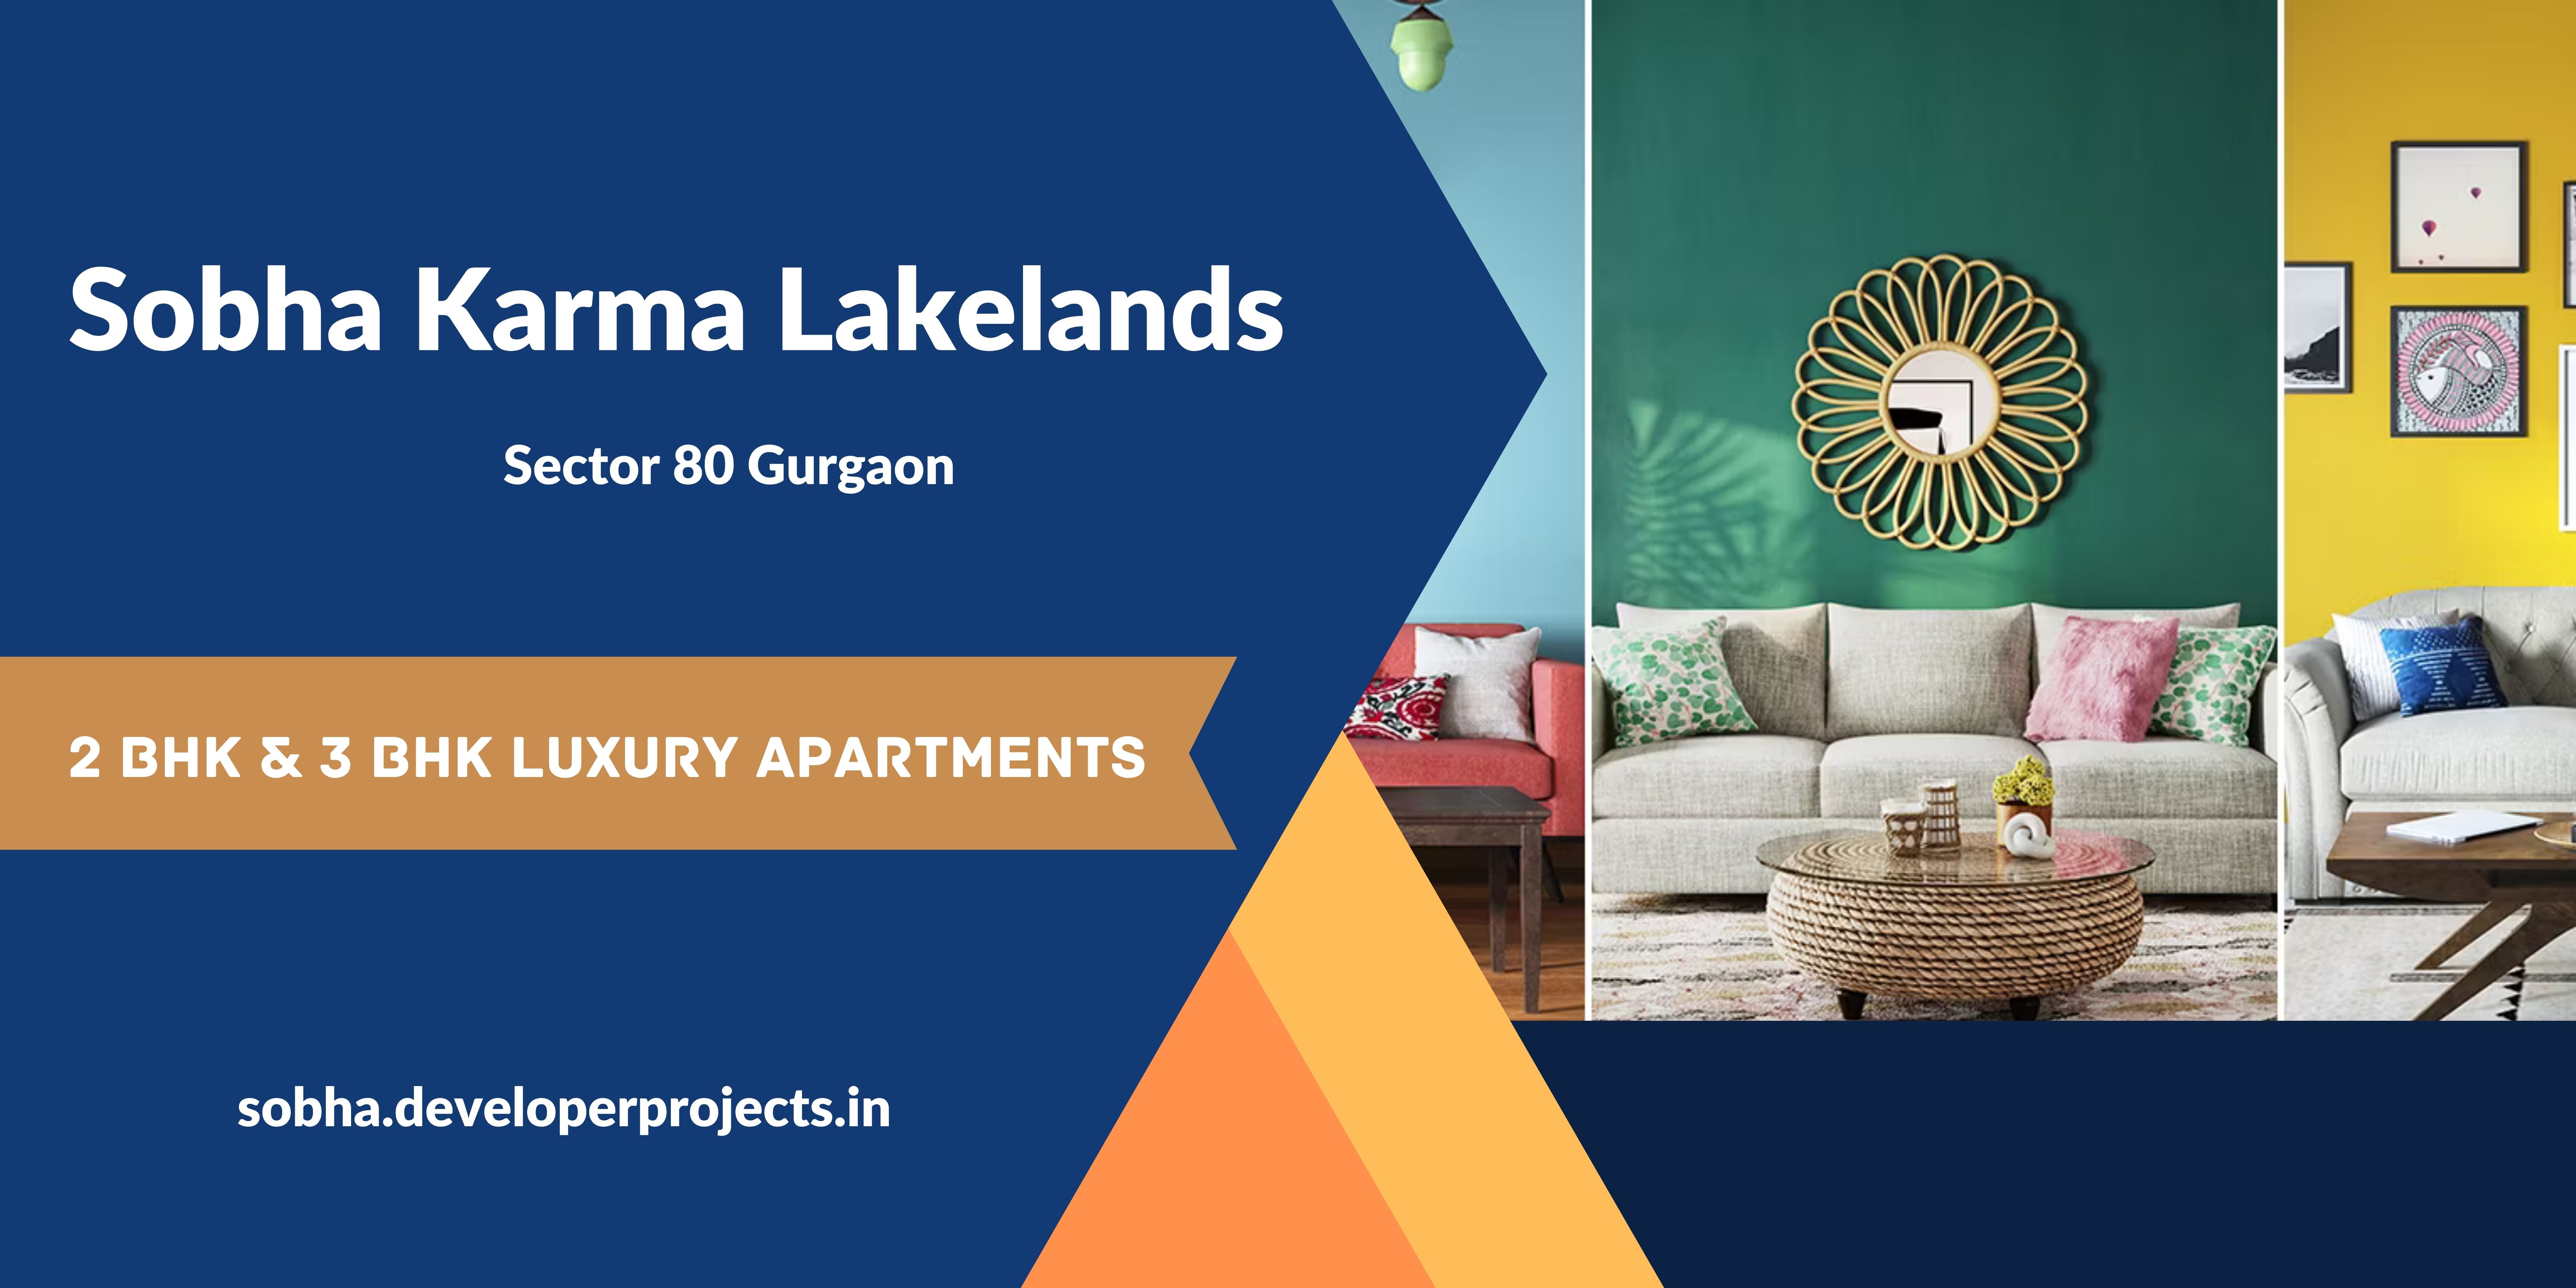 Sobha Karma Lakelands Sector 80 Gurgaon - A Luxury That Defines Your Existence